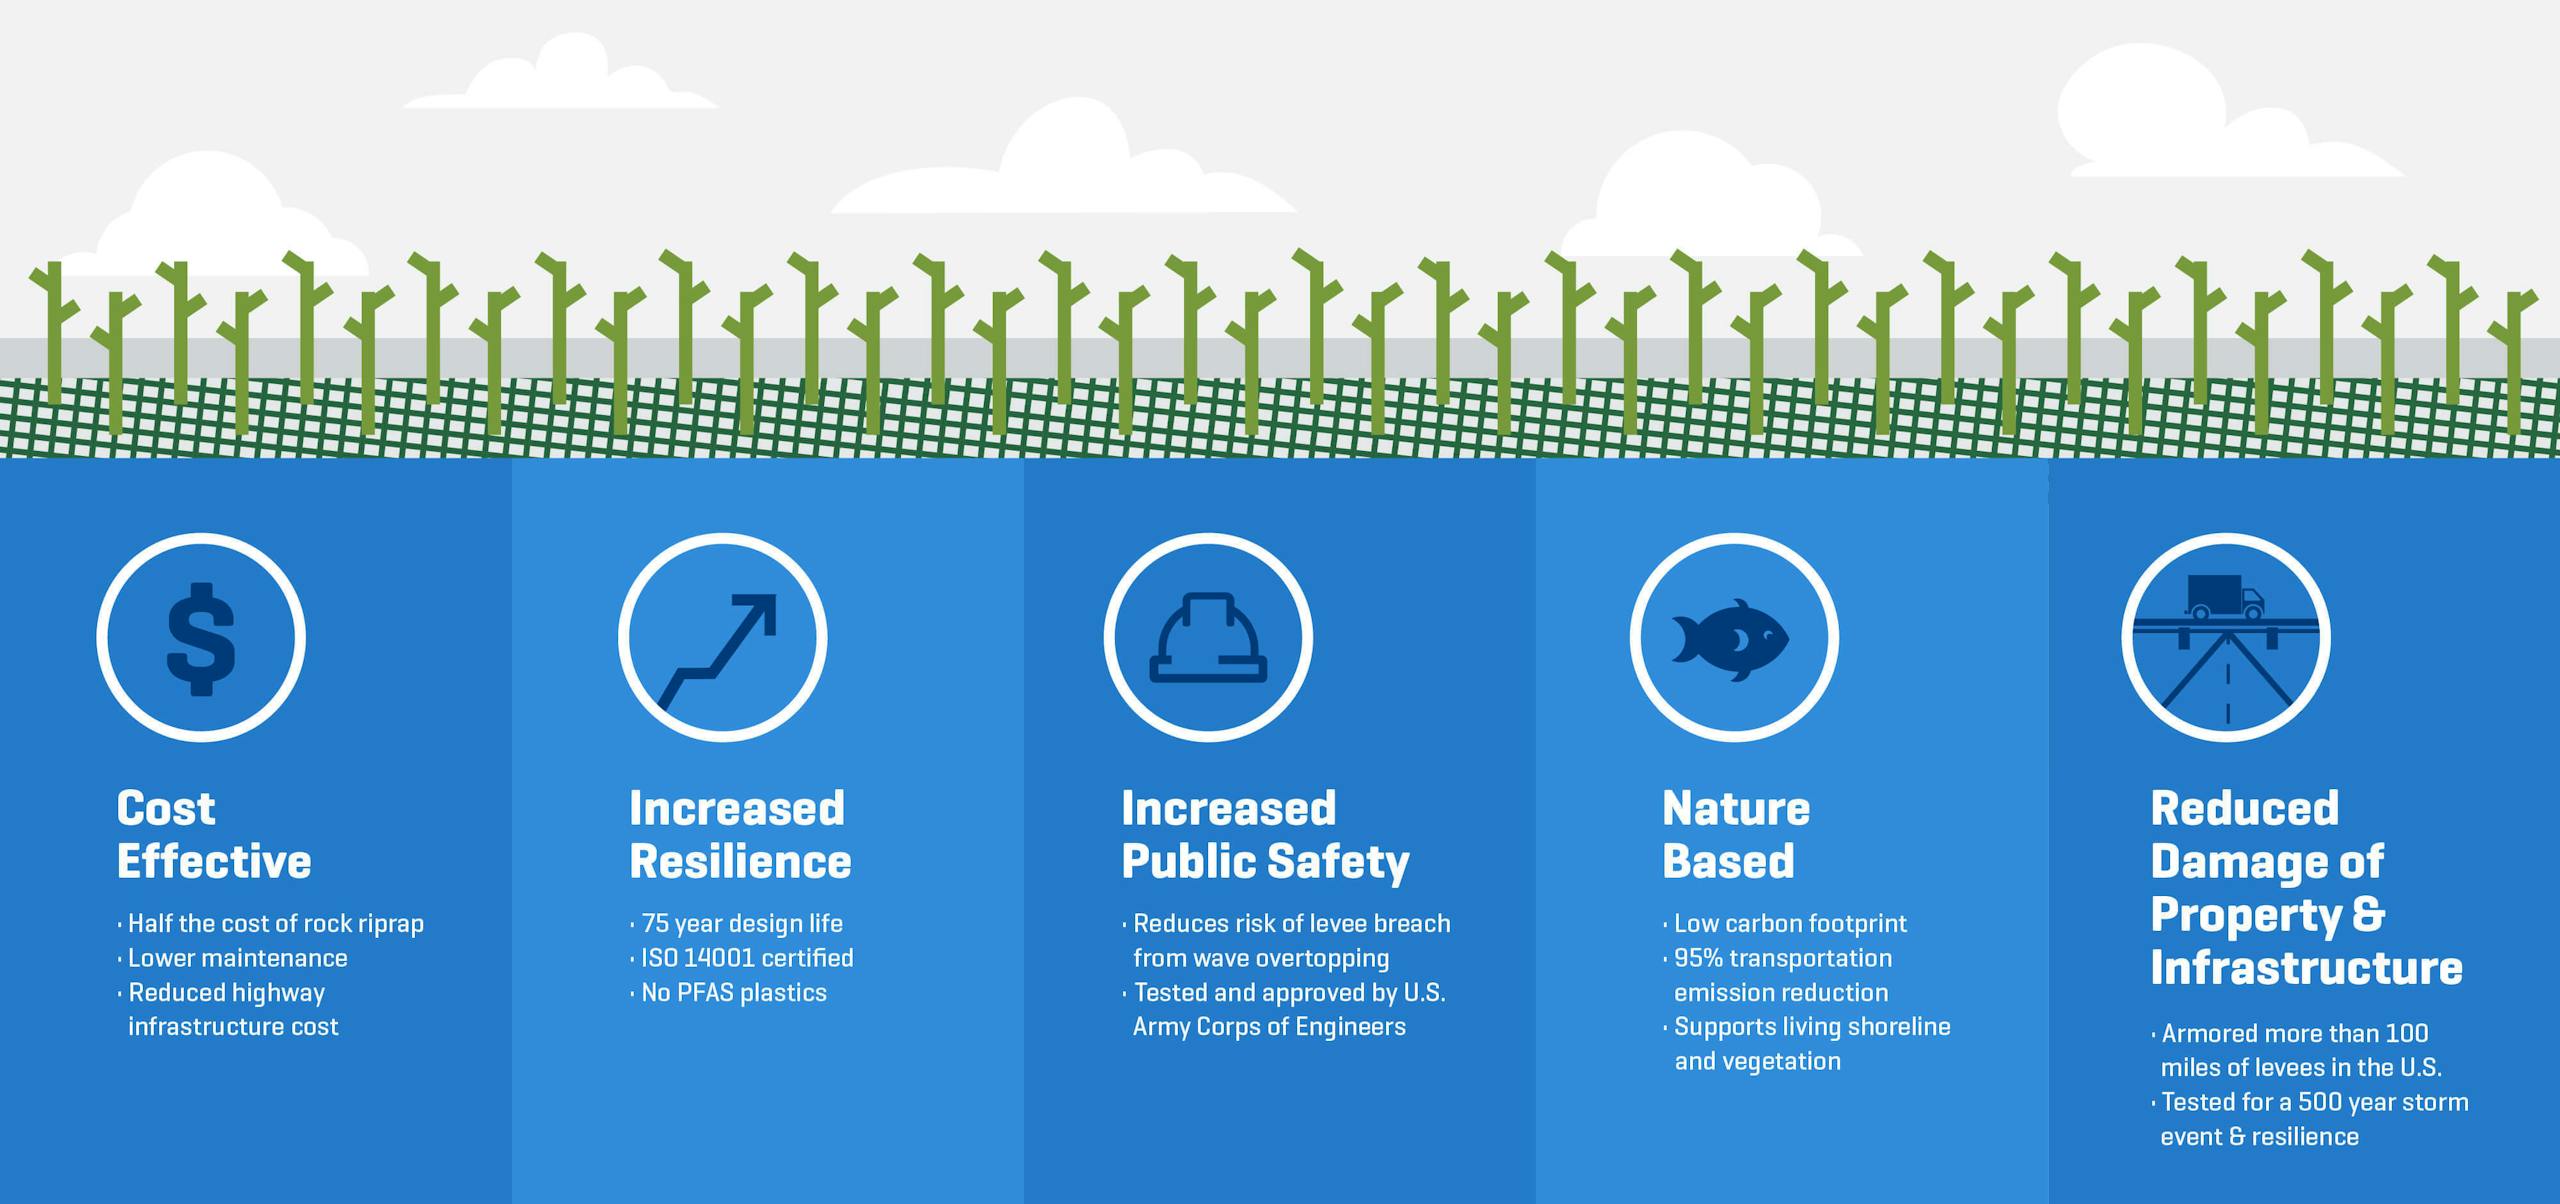 Resilient Flood Protection Infographic